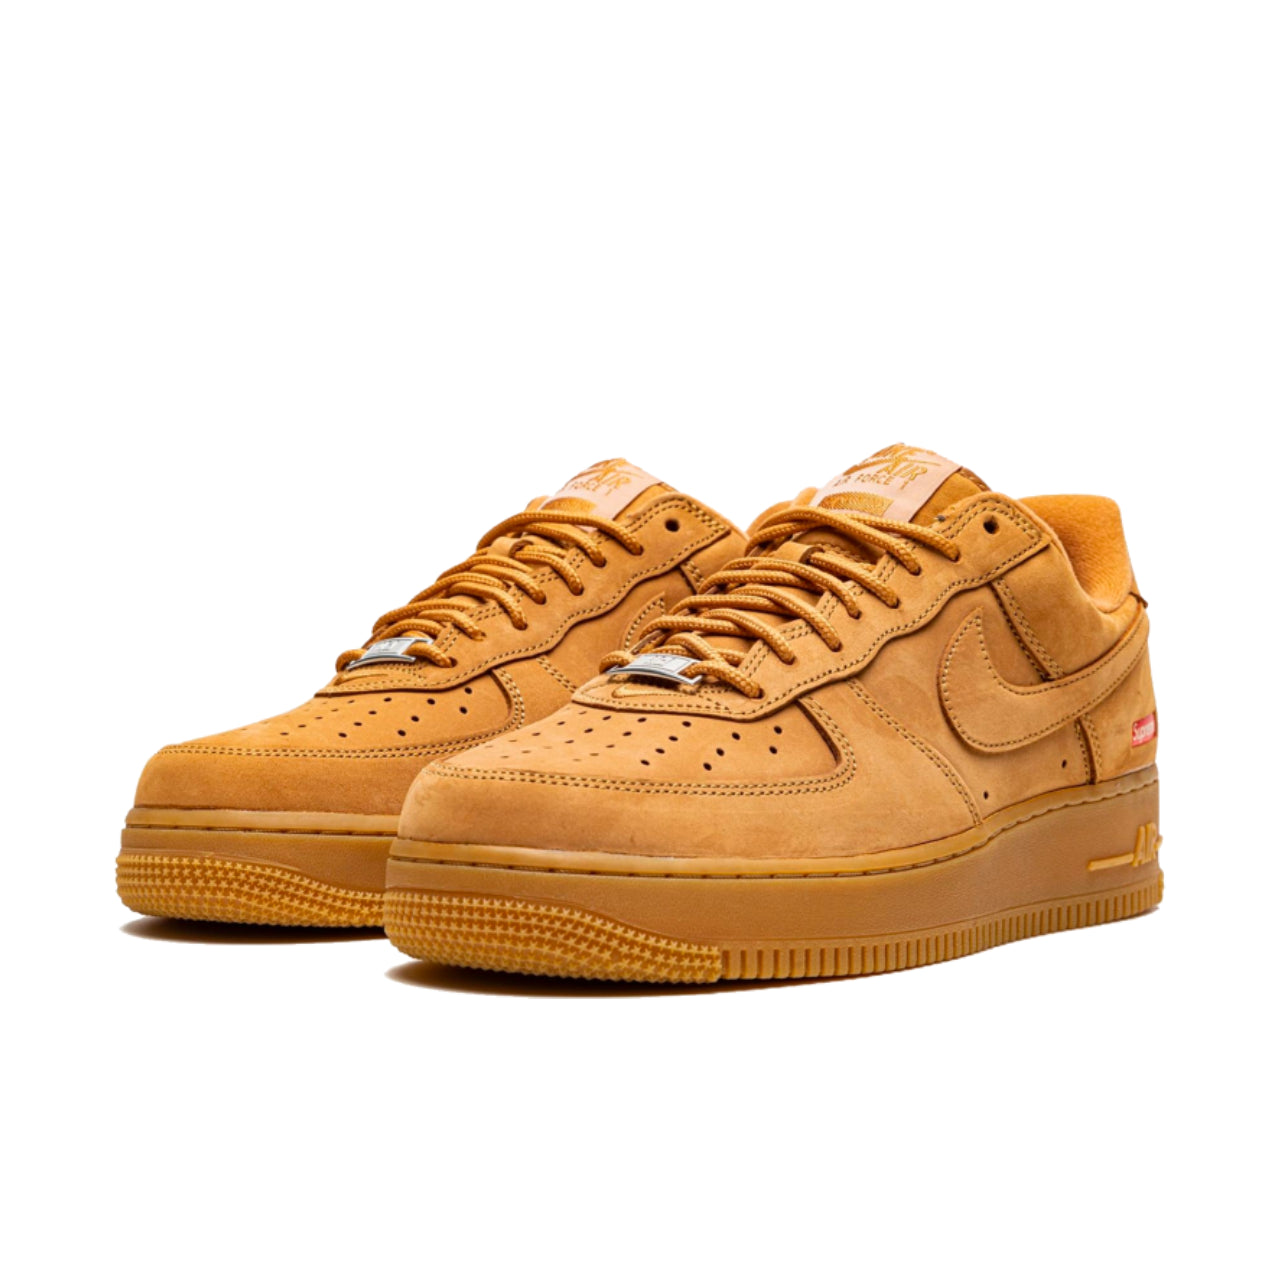 Nike Air Force 1 Low SP Supreme Wheat - DN1555-200 - Medial